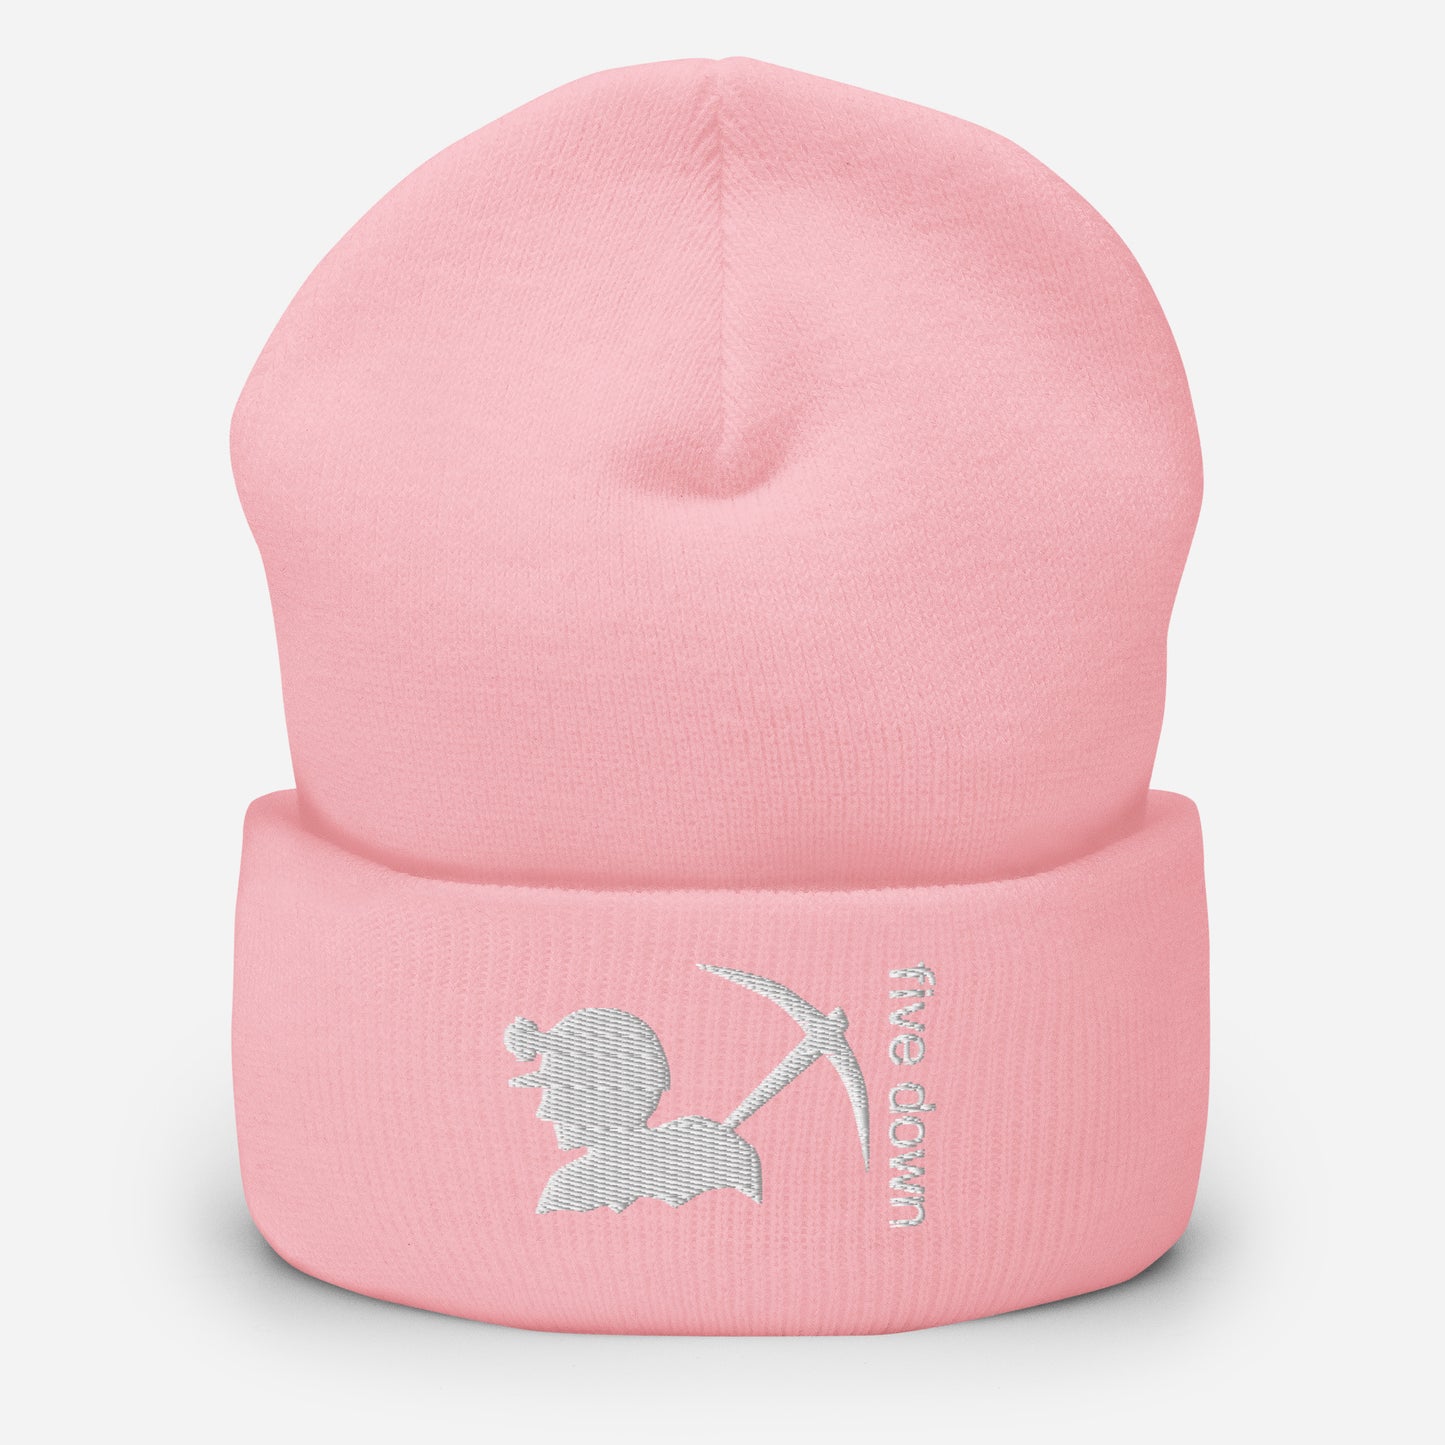 Cuffed Beanie - Click For ALL Color Options